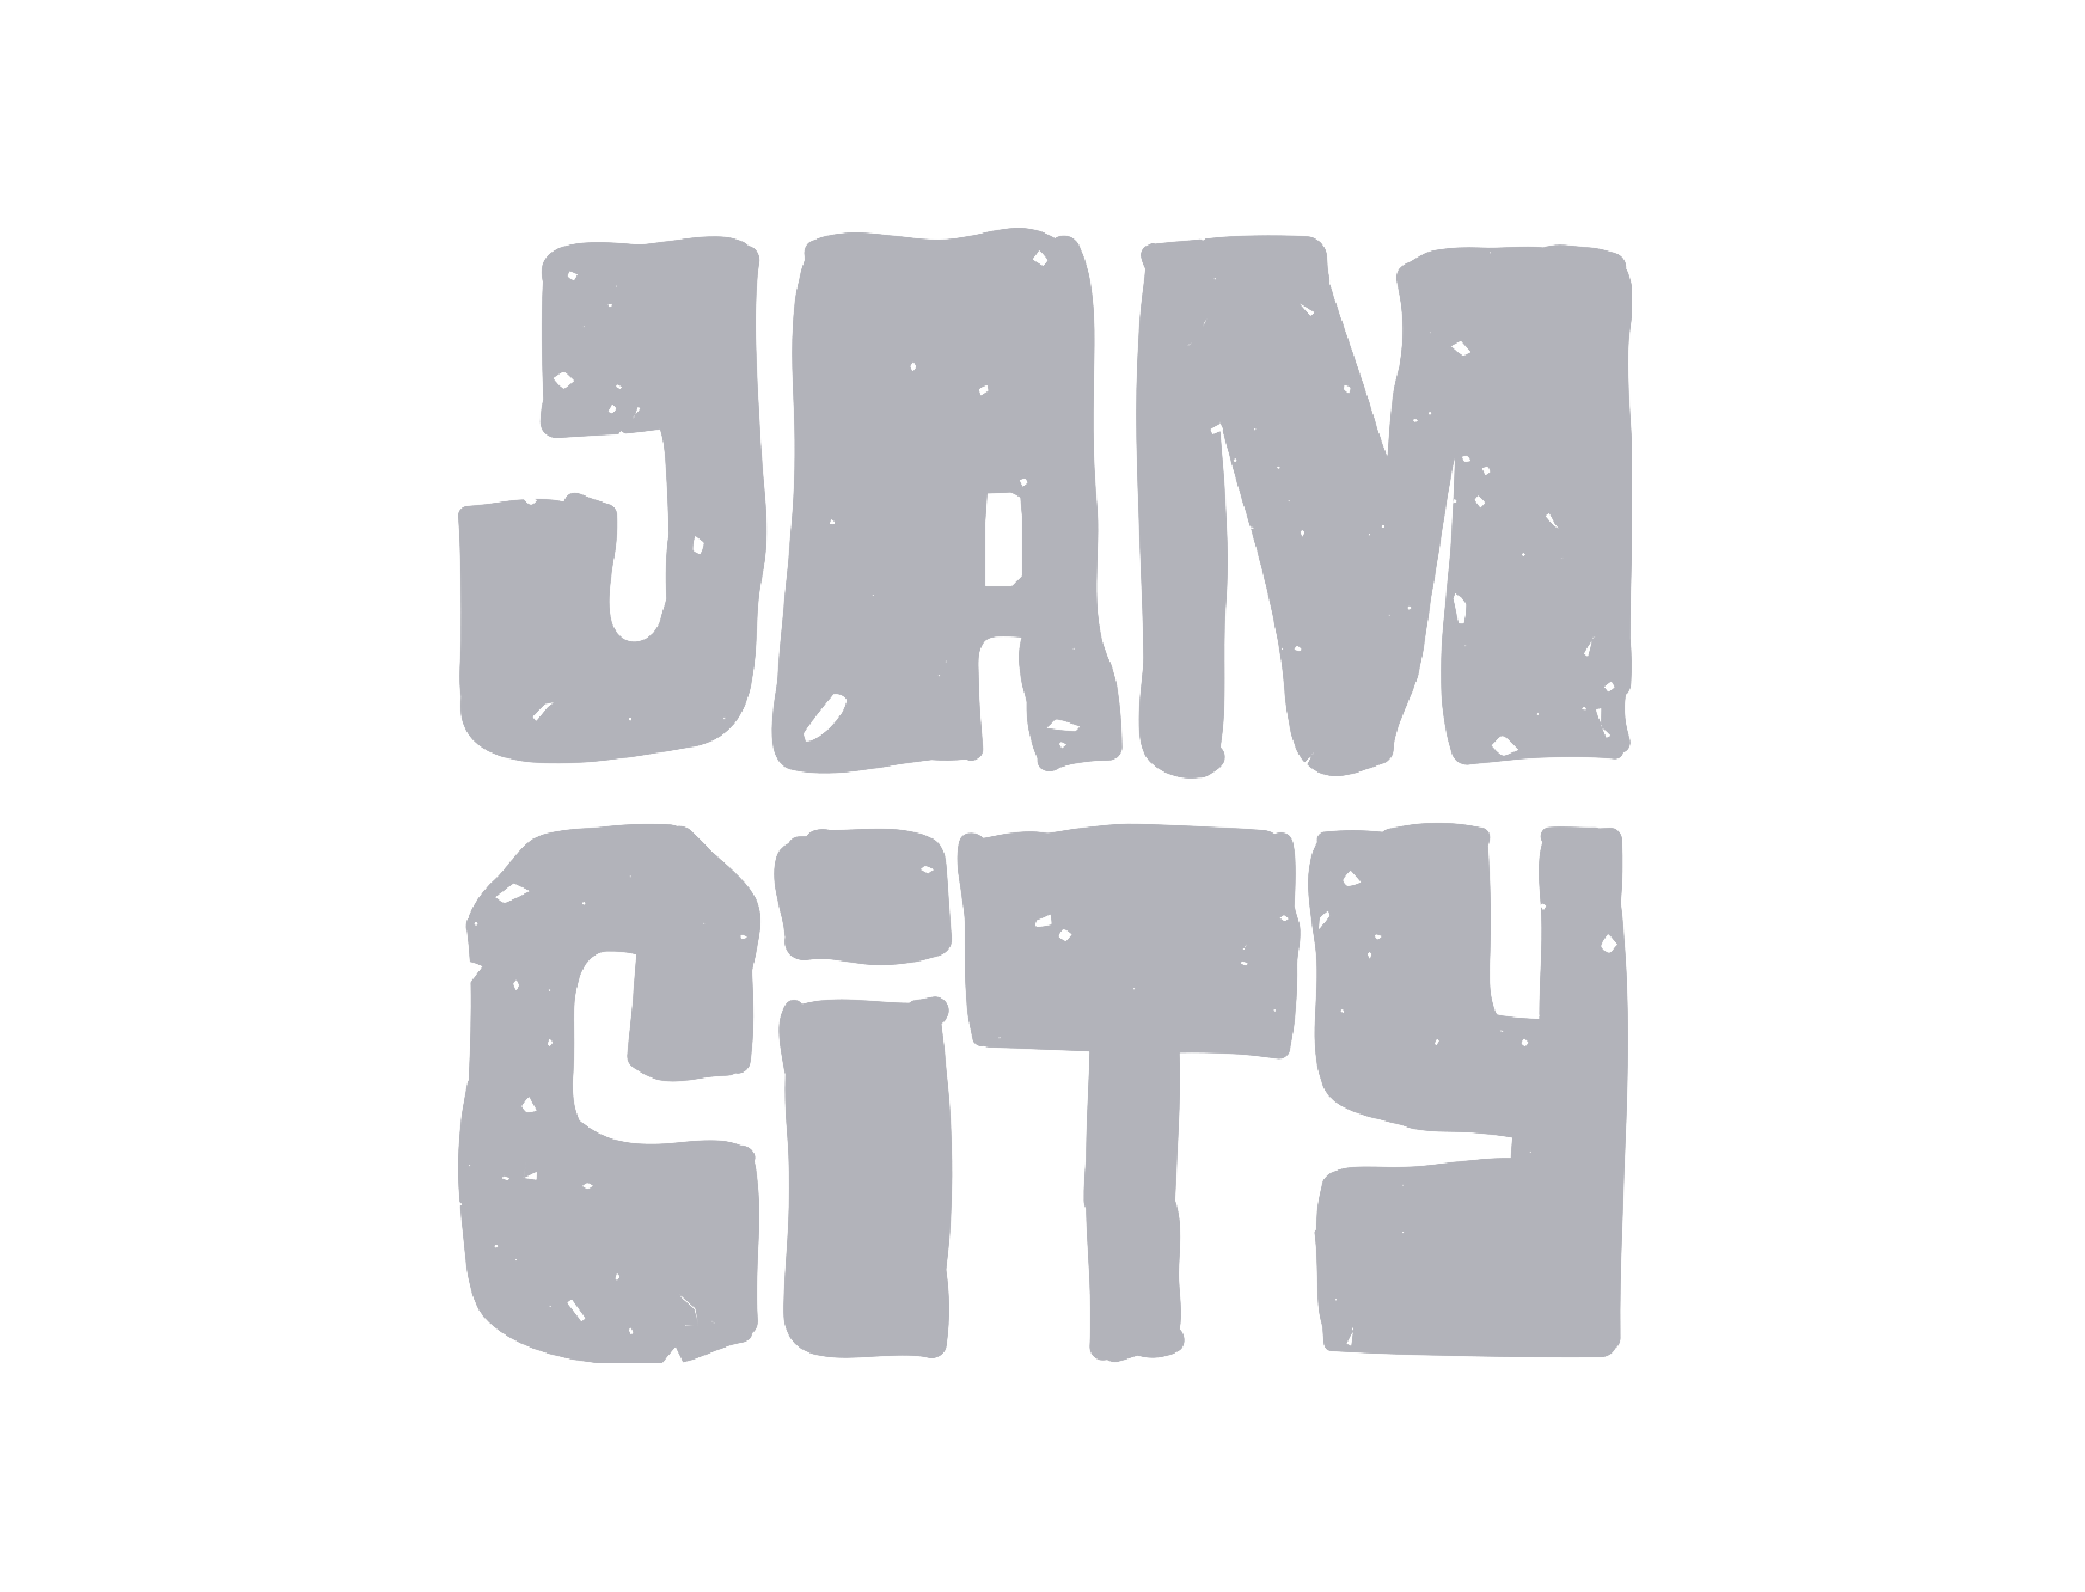 Jam City GameDev logo - trusted partners of 8Bit gaming industry recruitment